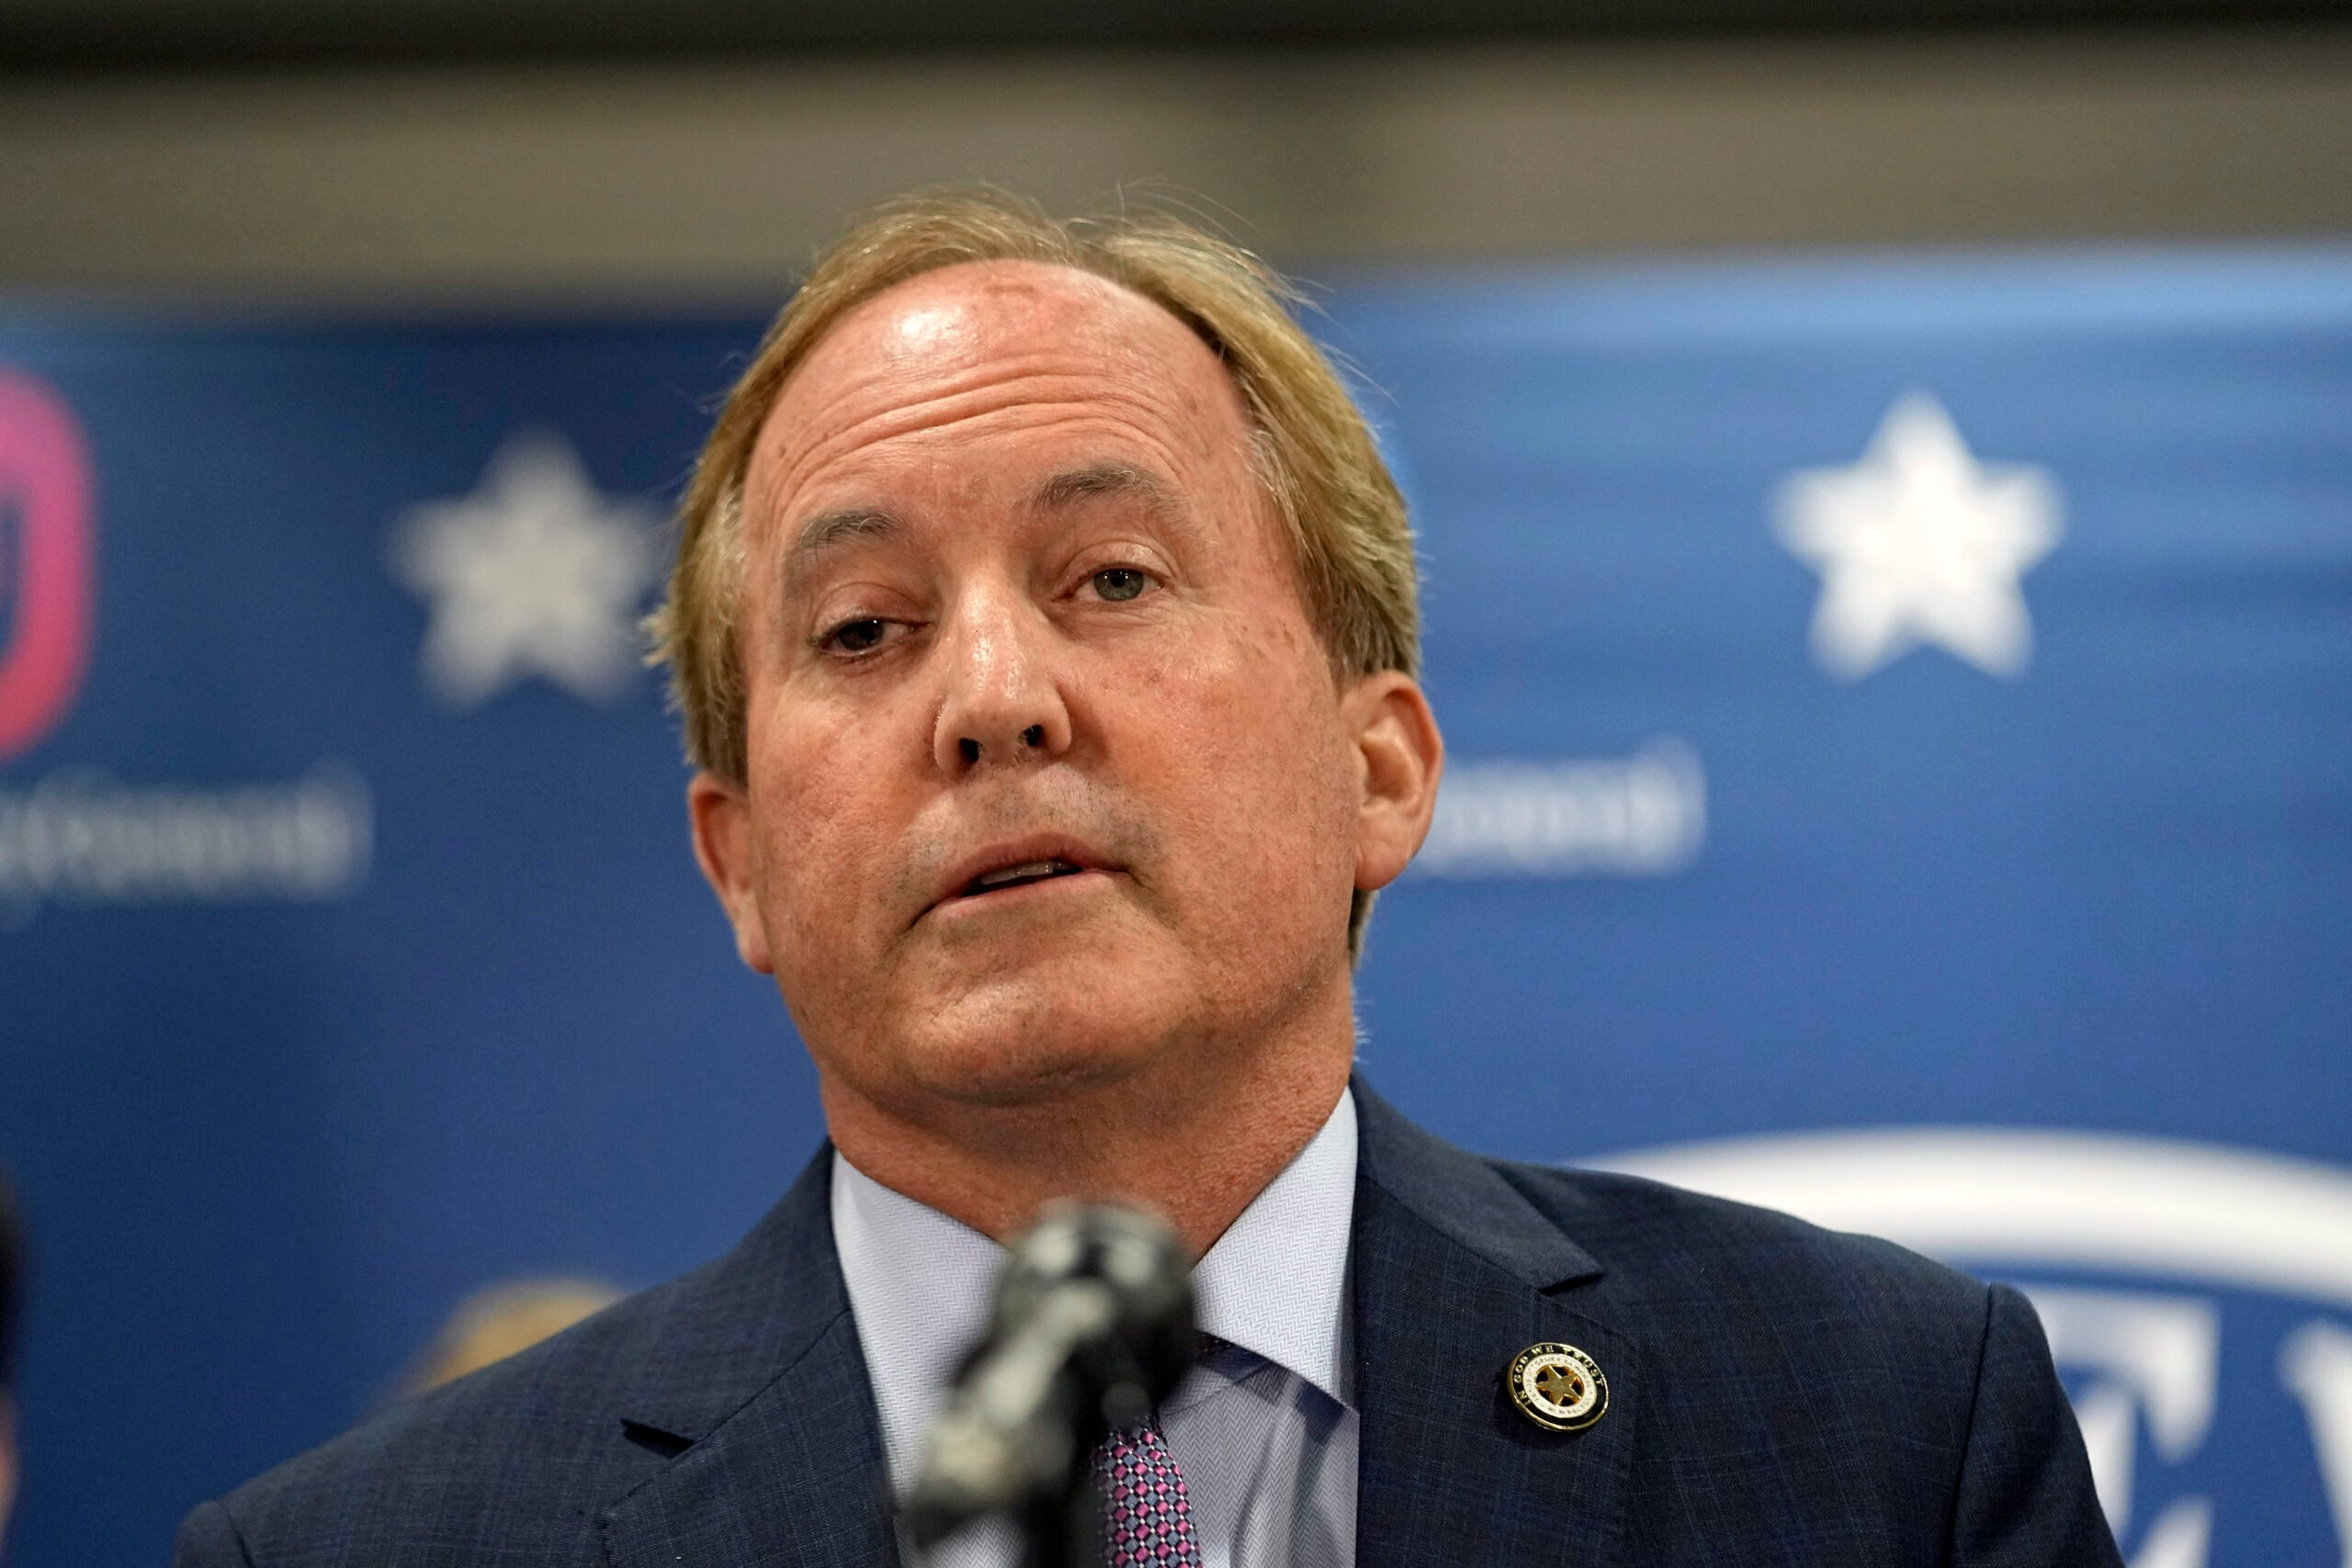 Texas state Attorney General Ken Paxton reads a statement at his office in Austin, Texas, Friday, May 26, 2023. An investigating committee says the Texas House of Representatives will vote Saturday on whether to impeach state Attorney General Ken Paxton. (AP Photo/Eric Gay)